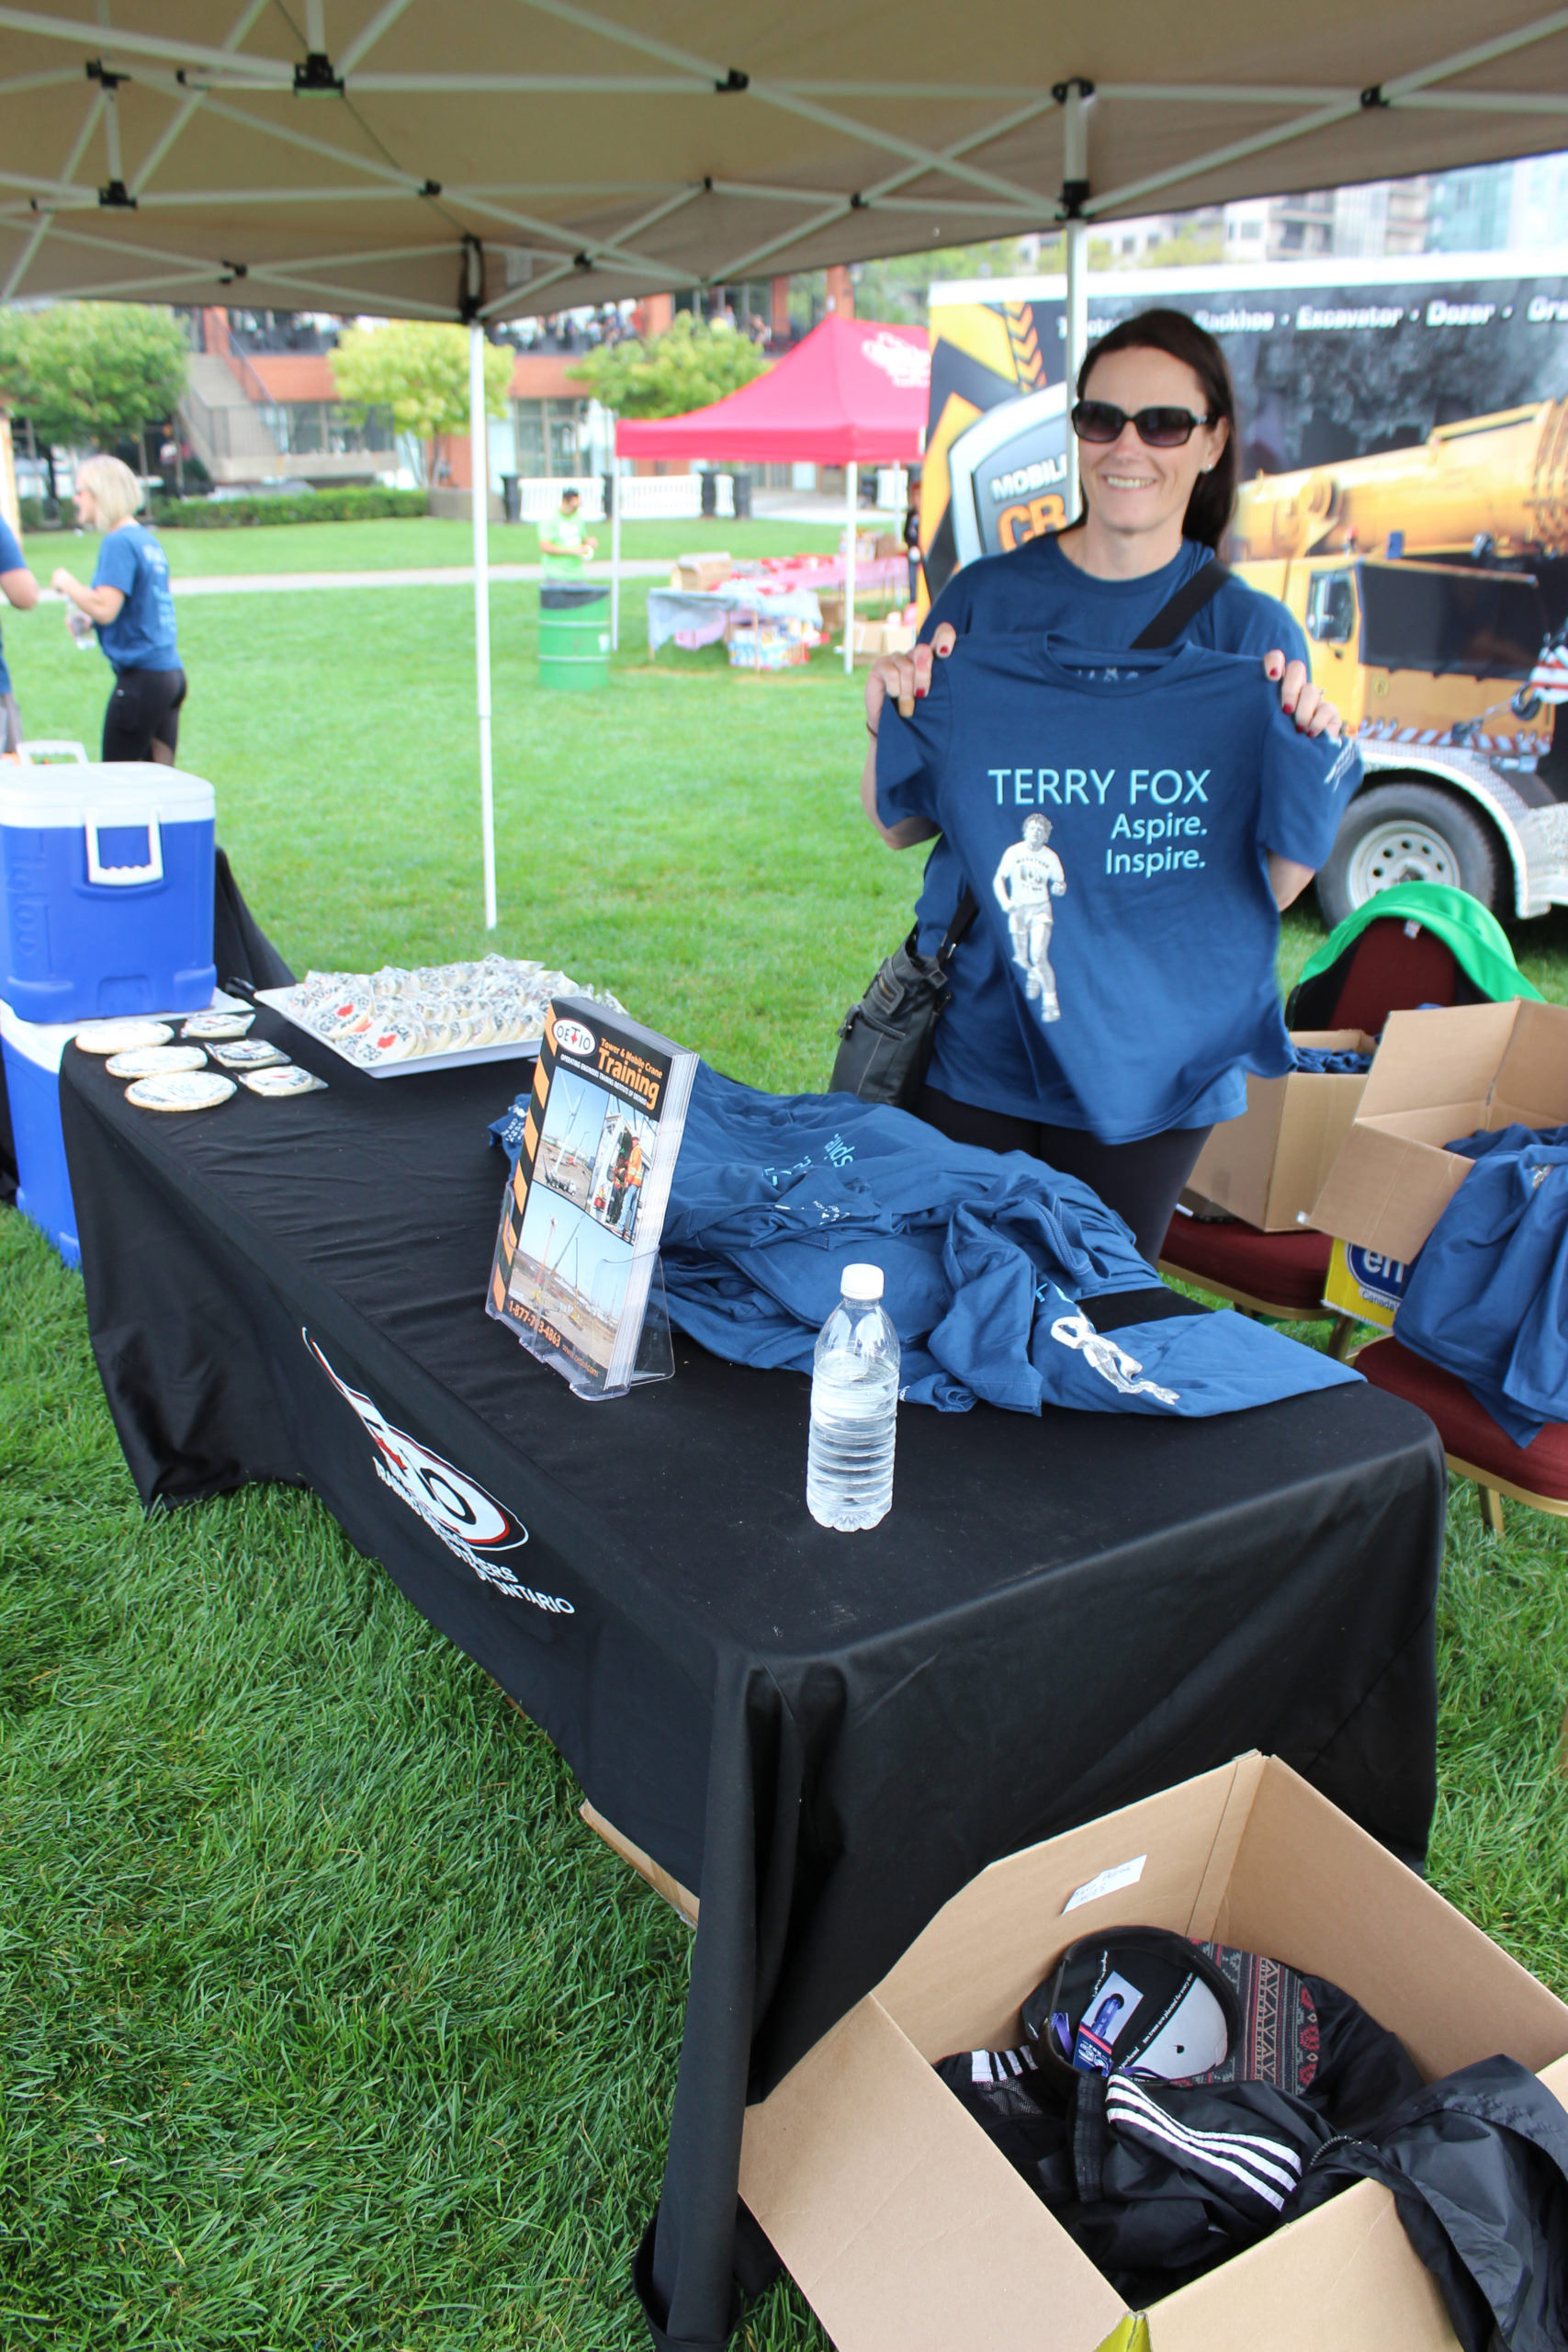 Local 793 member helps raise funds for the Terry Fox Foundation.